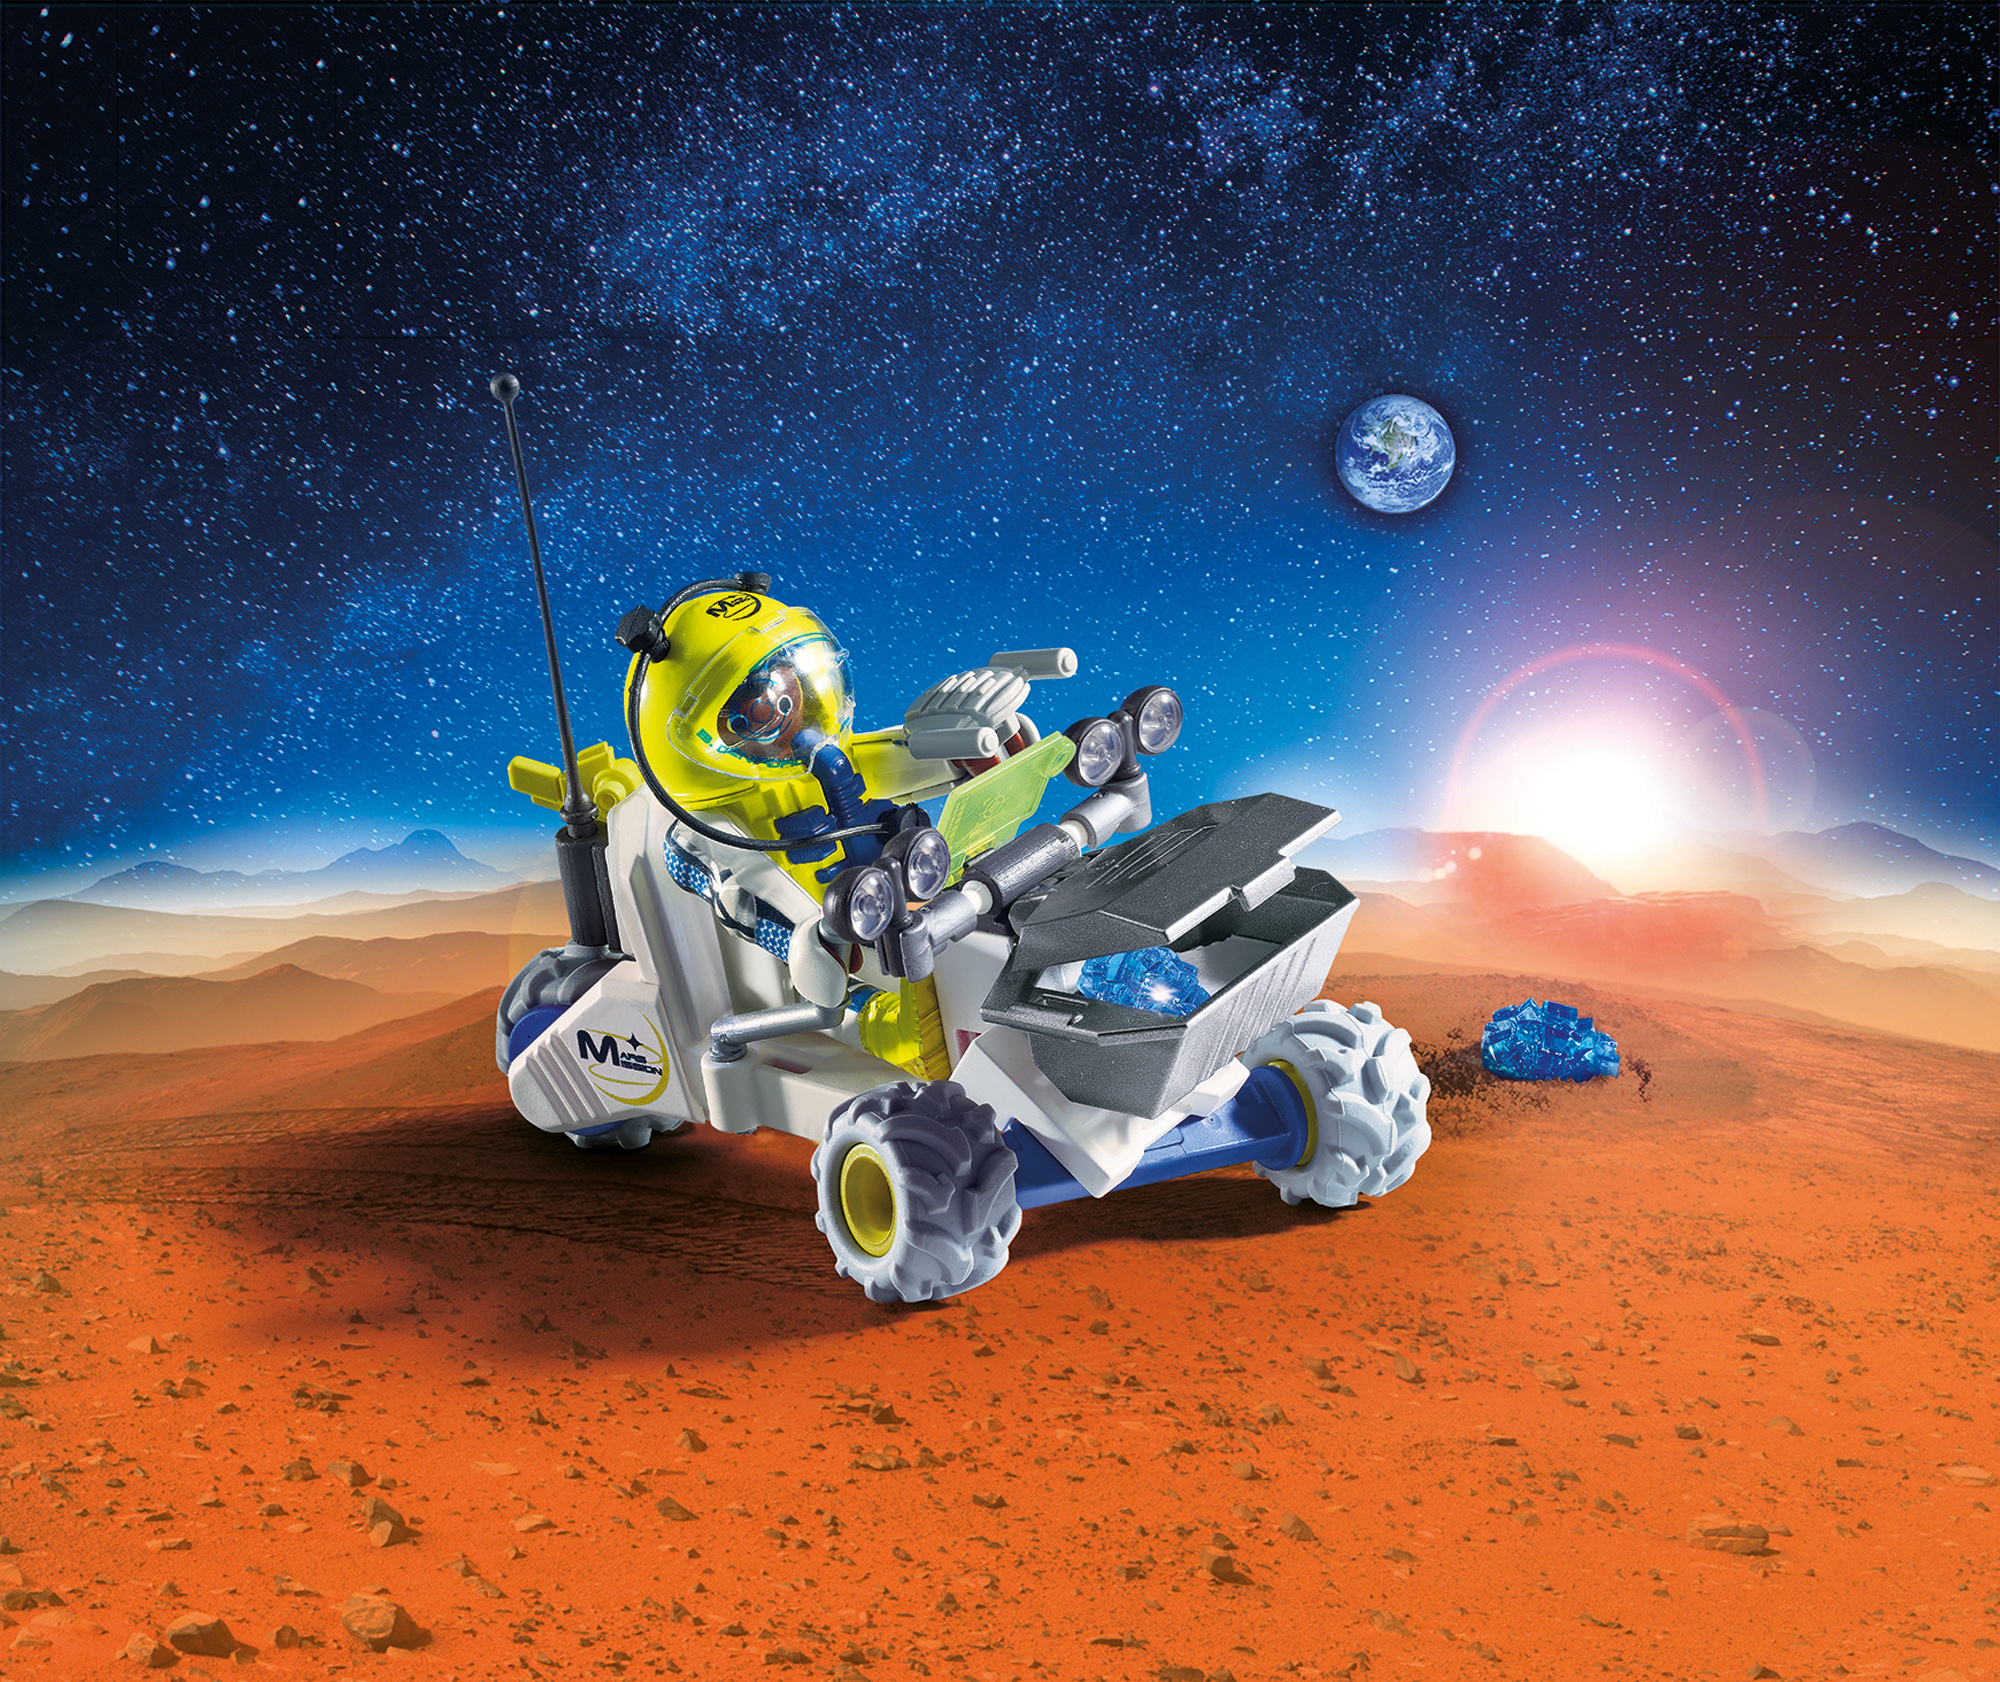 PLAYMOBIL Mars Rover Vehicle - image 2 of 6